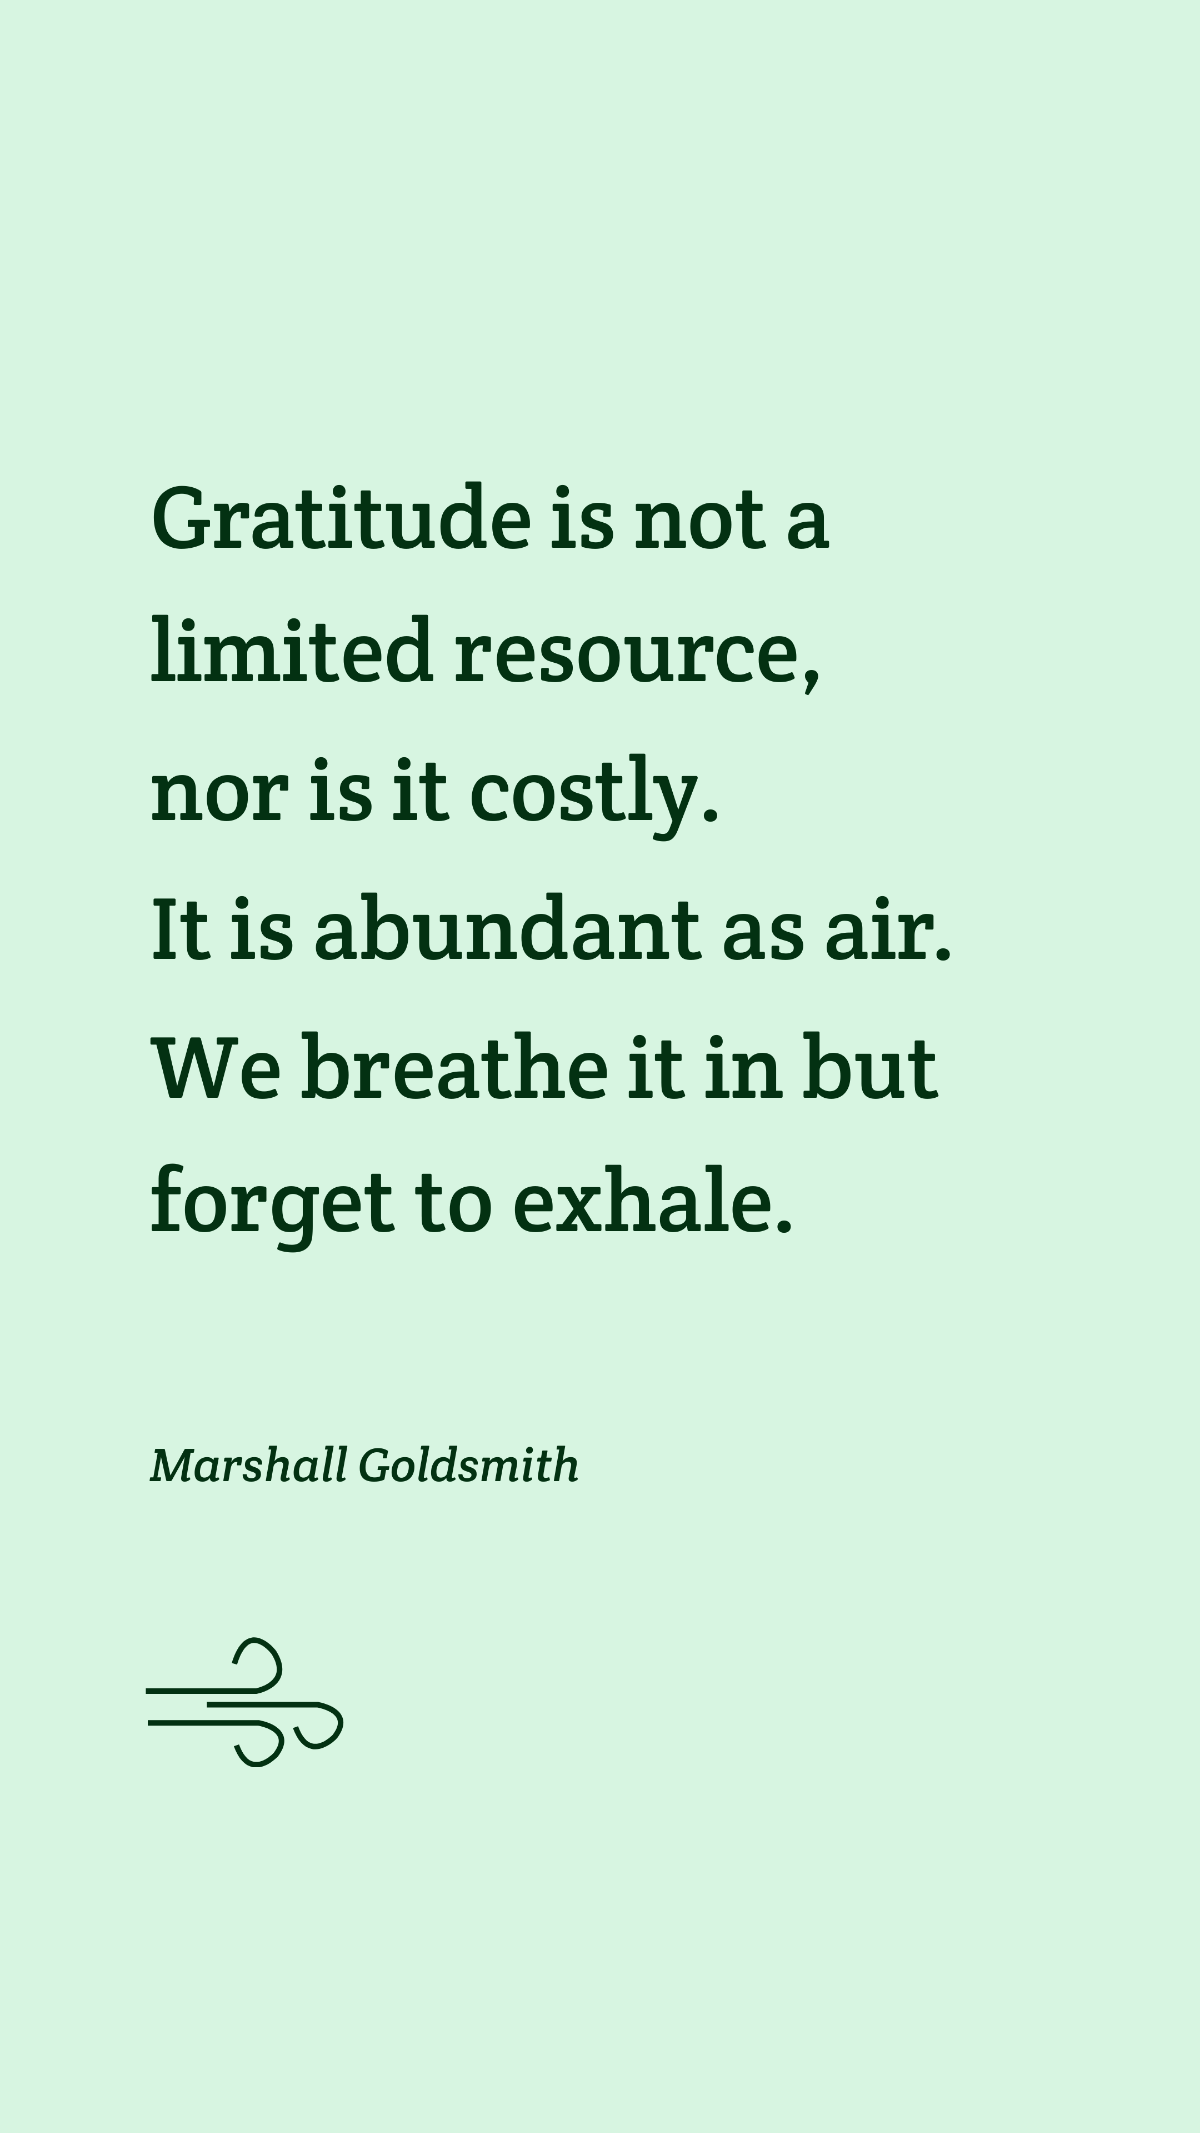 Marshall Goldsmith - Gratitude is not a limited resource, nor is it costly. It is abundant as air. We breathe it in but forget to exhale.